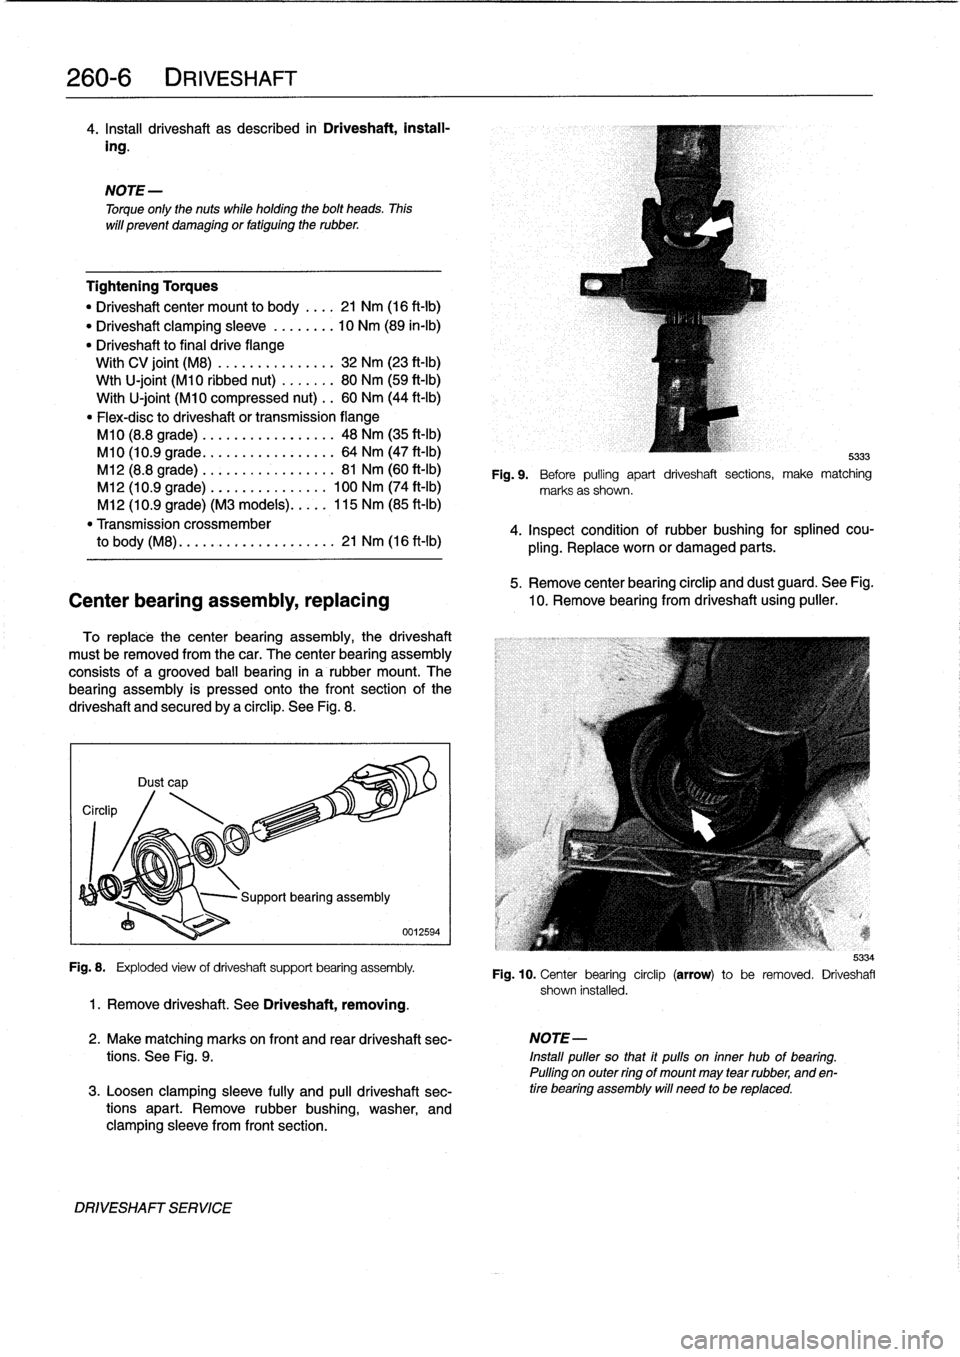 BMW 323i 1998 E36 Workshop Manual 
260-
6
DRIVESHAFT

4
.
Insta¡¡
driveshaft
as
described
in
Driveshaft,
install-

ing
.

Tightening
Torques

"
Driveshaft
center
mount
to
body
.
...
21
Nm
(16
ft-Ib)

"
Driveshaft
clamping
sleeve
...